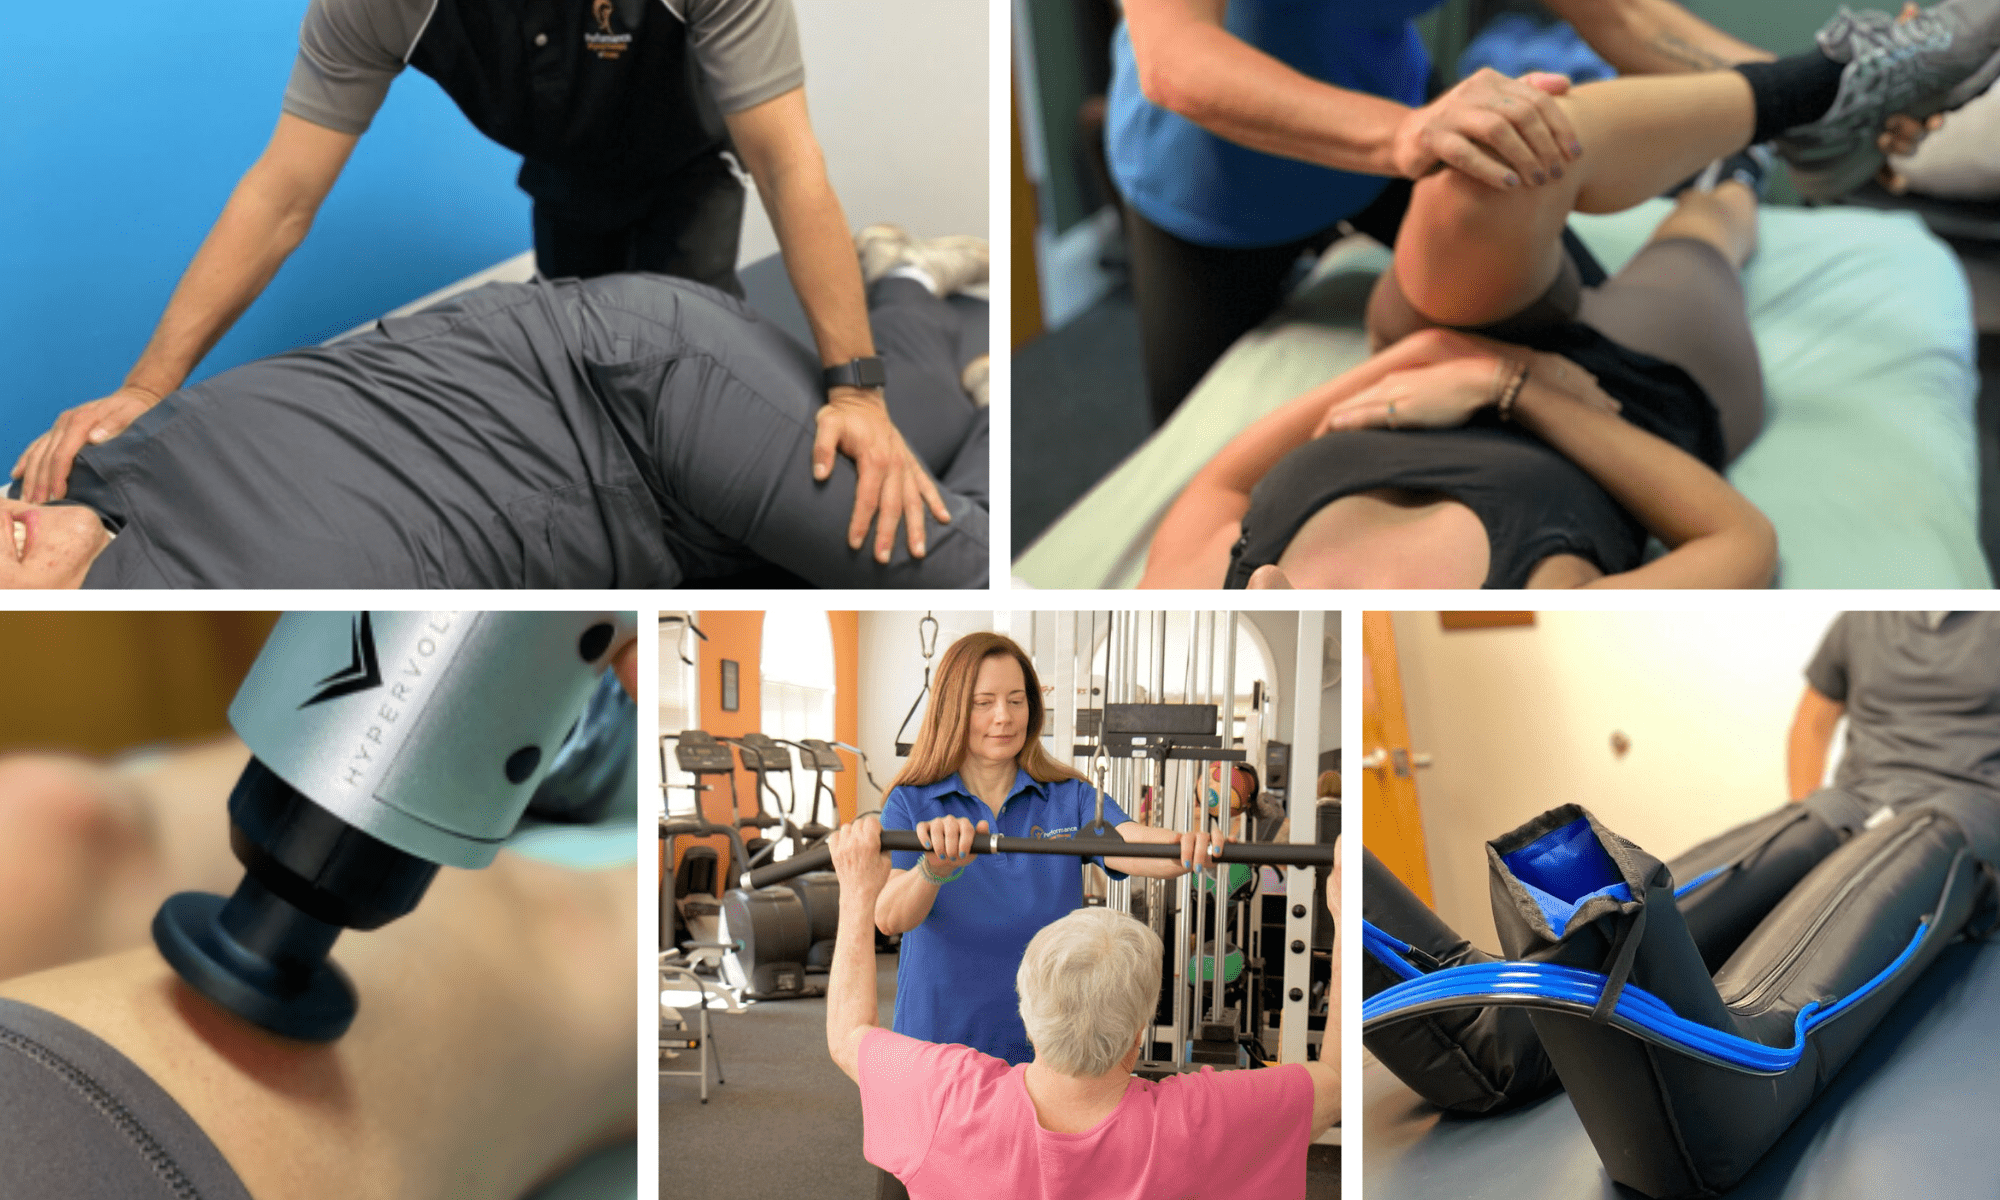 Featured image for “New StretchPlex program to offer individualized stretching, massage”